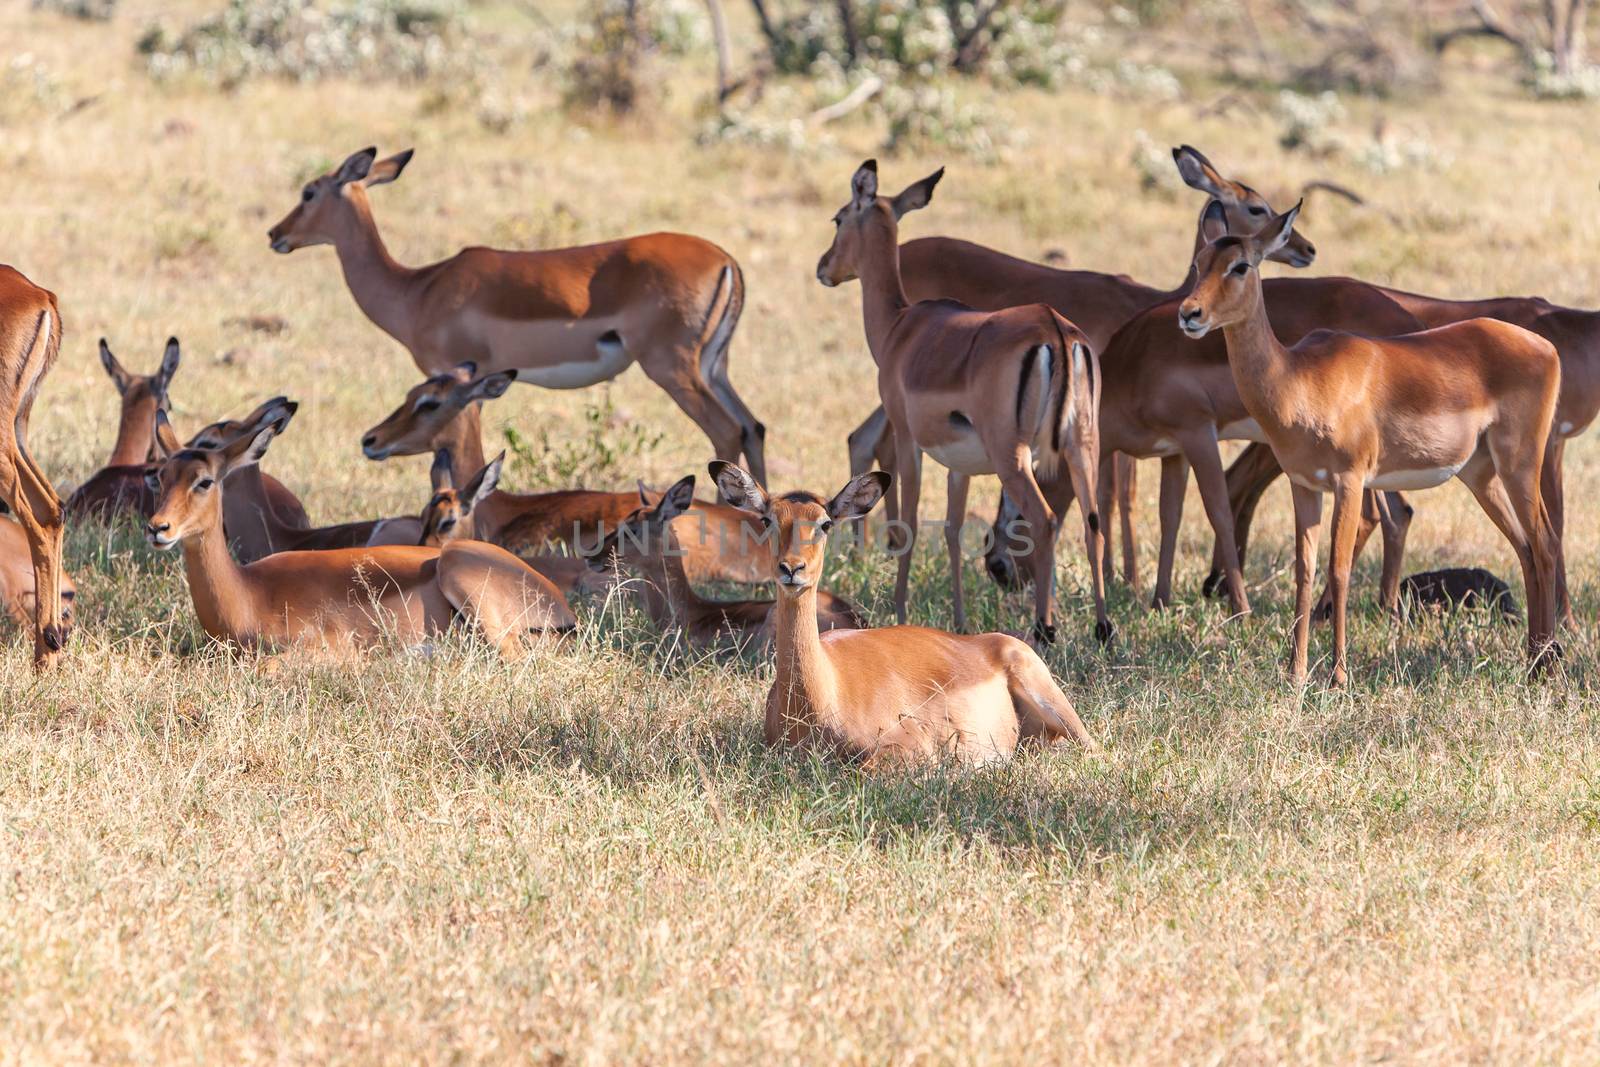 The group of antelopes on the grass. Kenya, Africa 